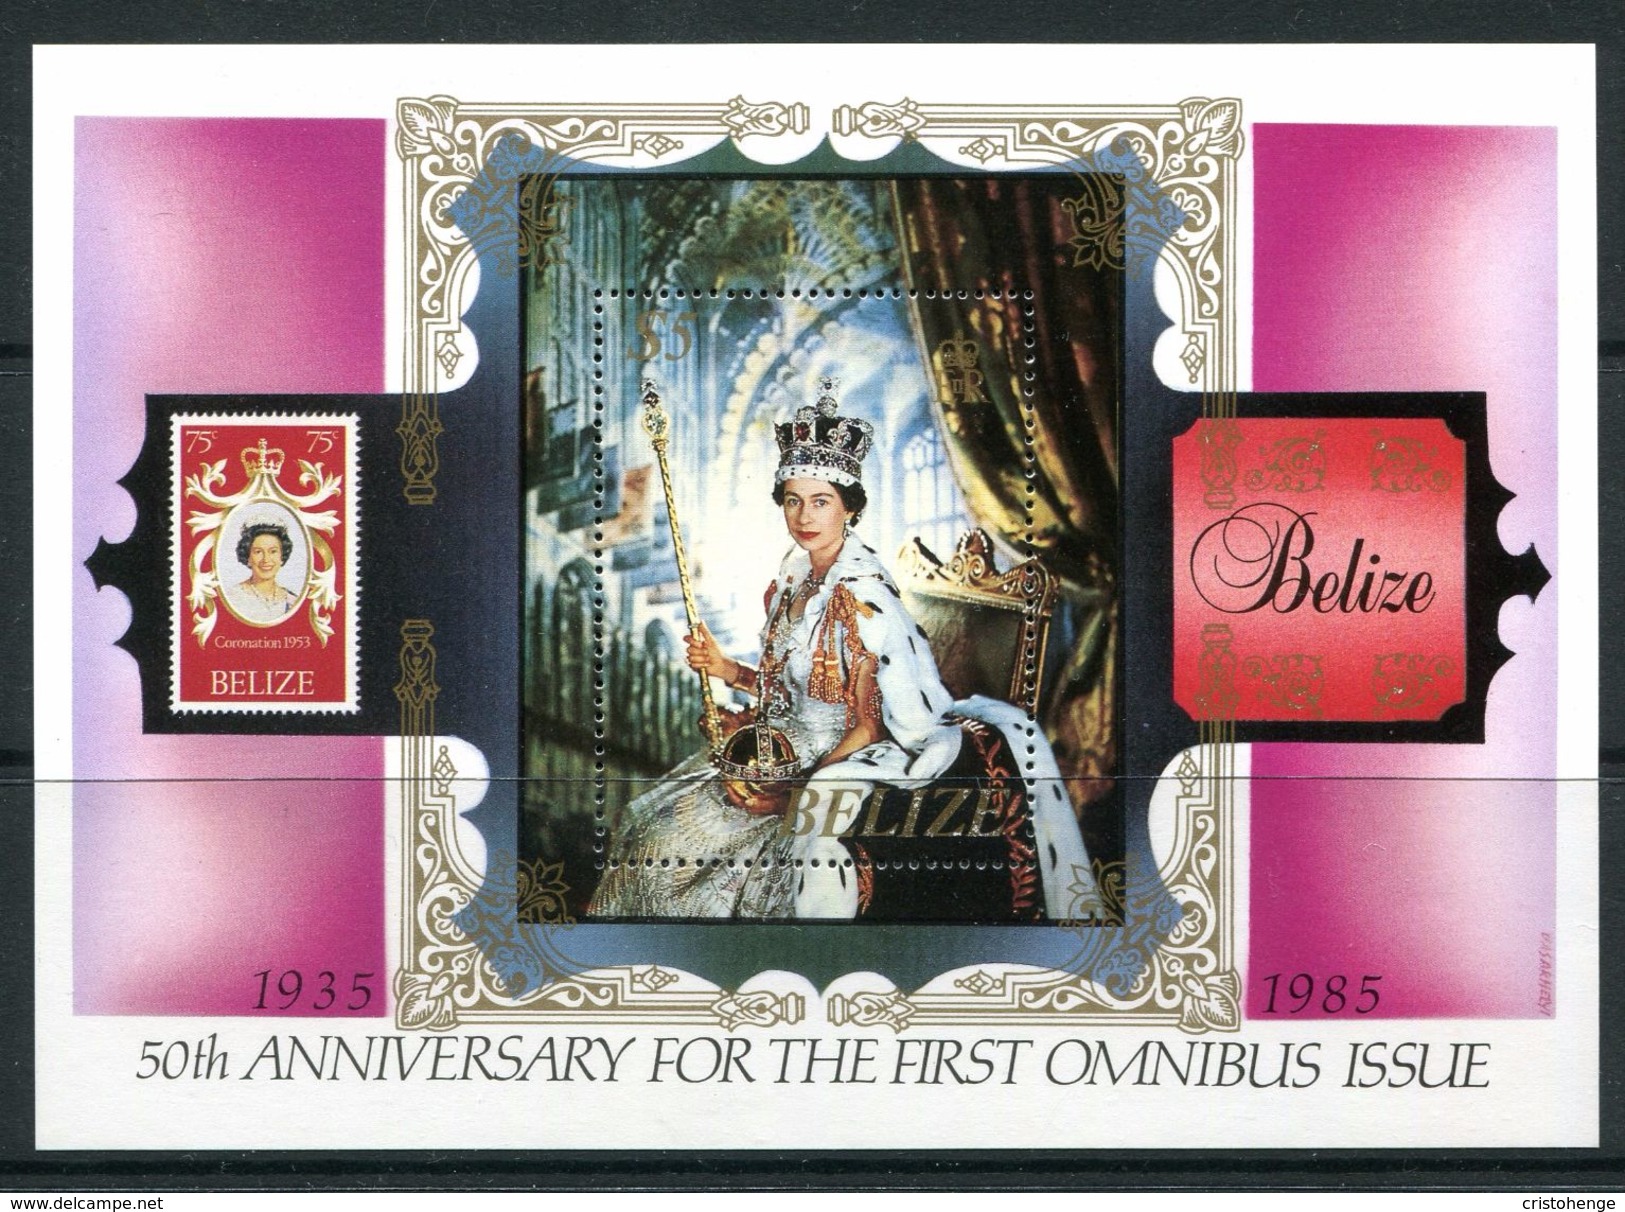 Belize 1985 50th Anniversary Of First Commonwealth Omnibus Set MS MNH (SG MA845) - Belice (1973-...)